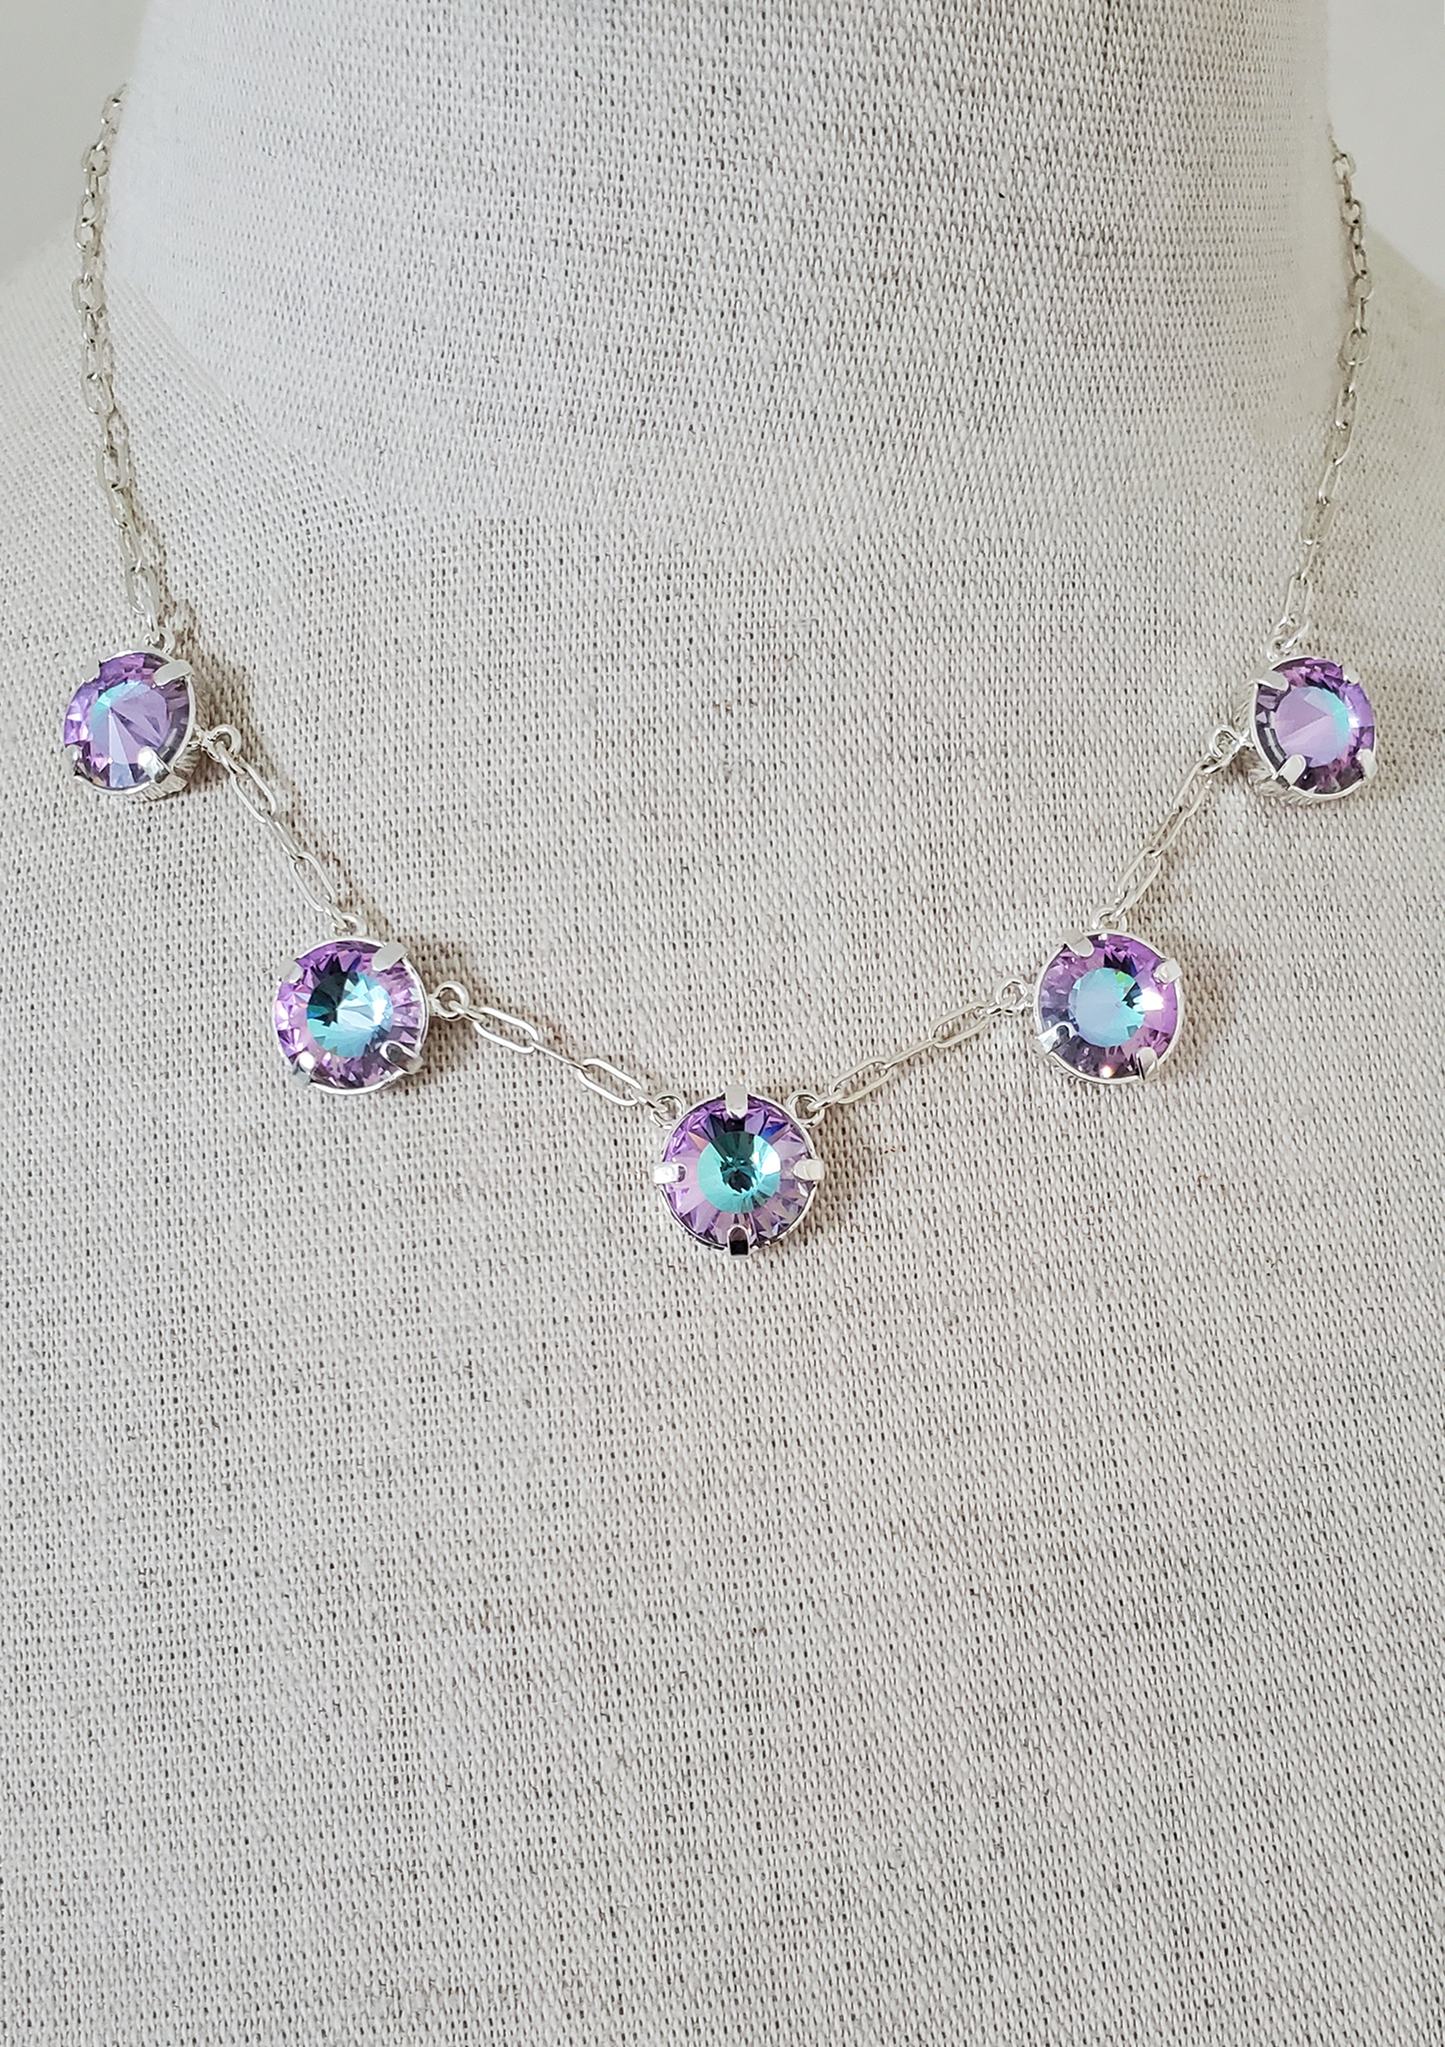 Wisteria Crystal Necklace